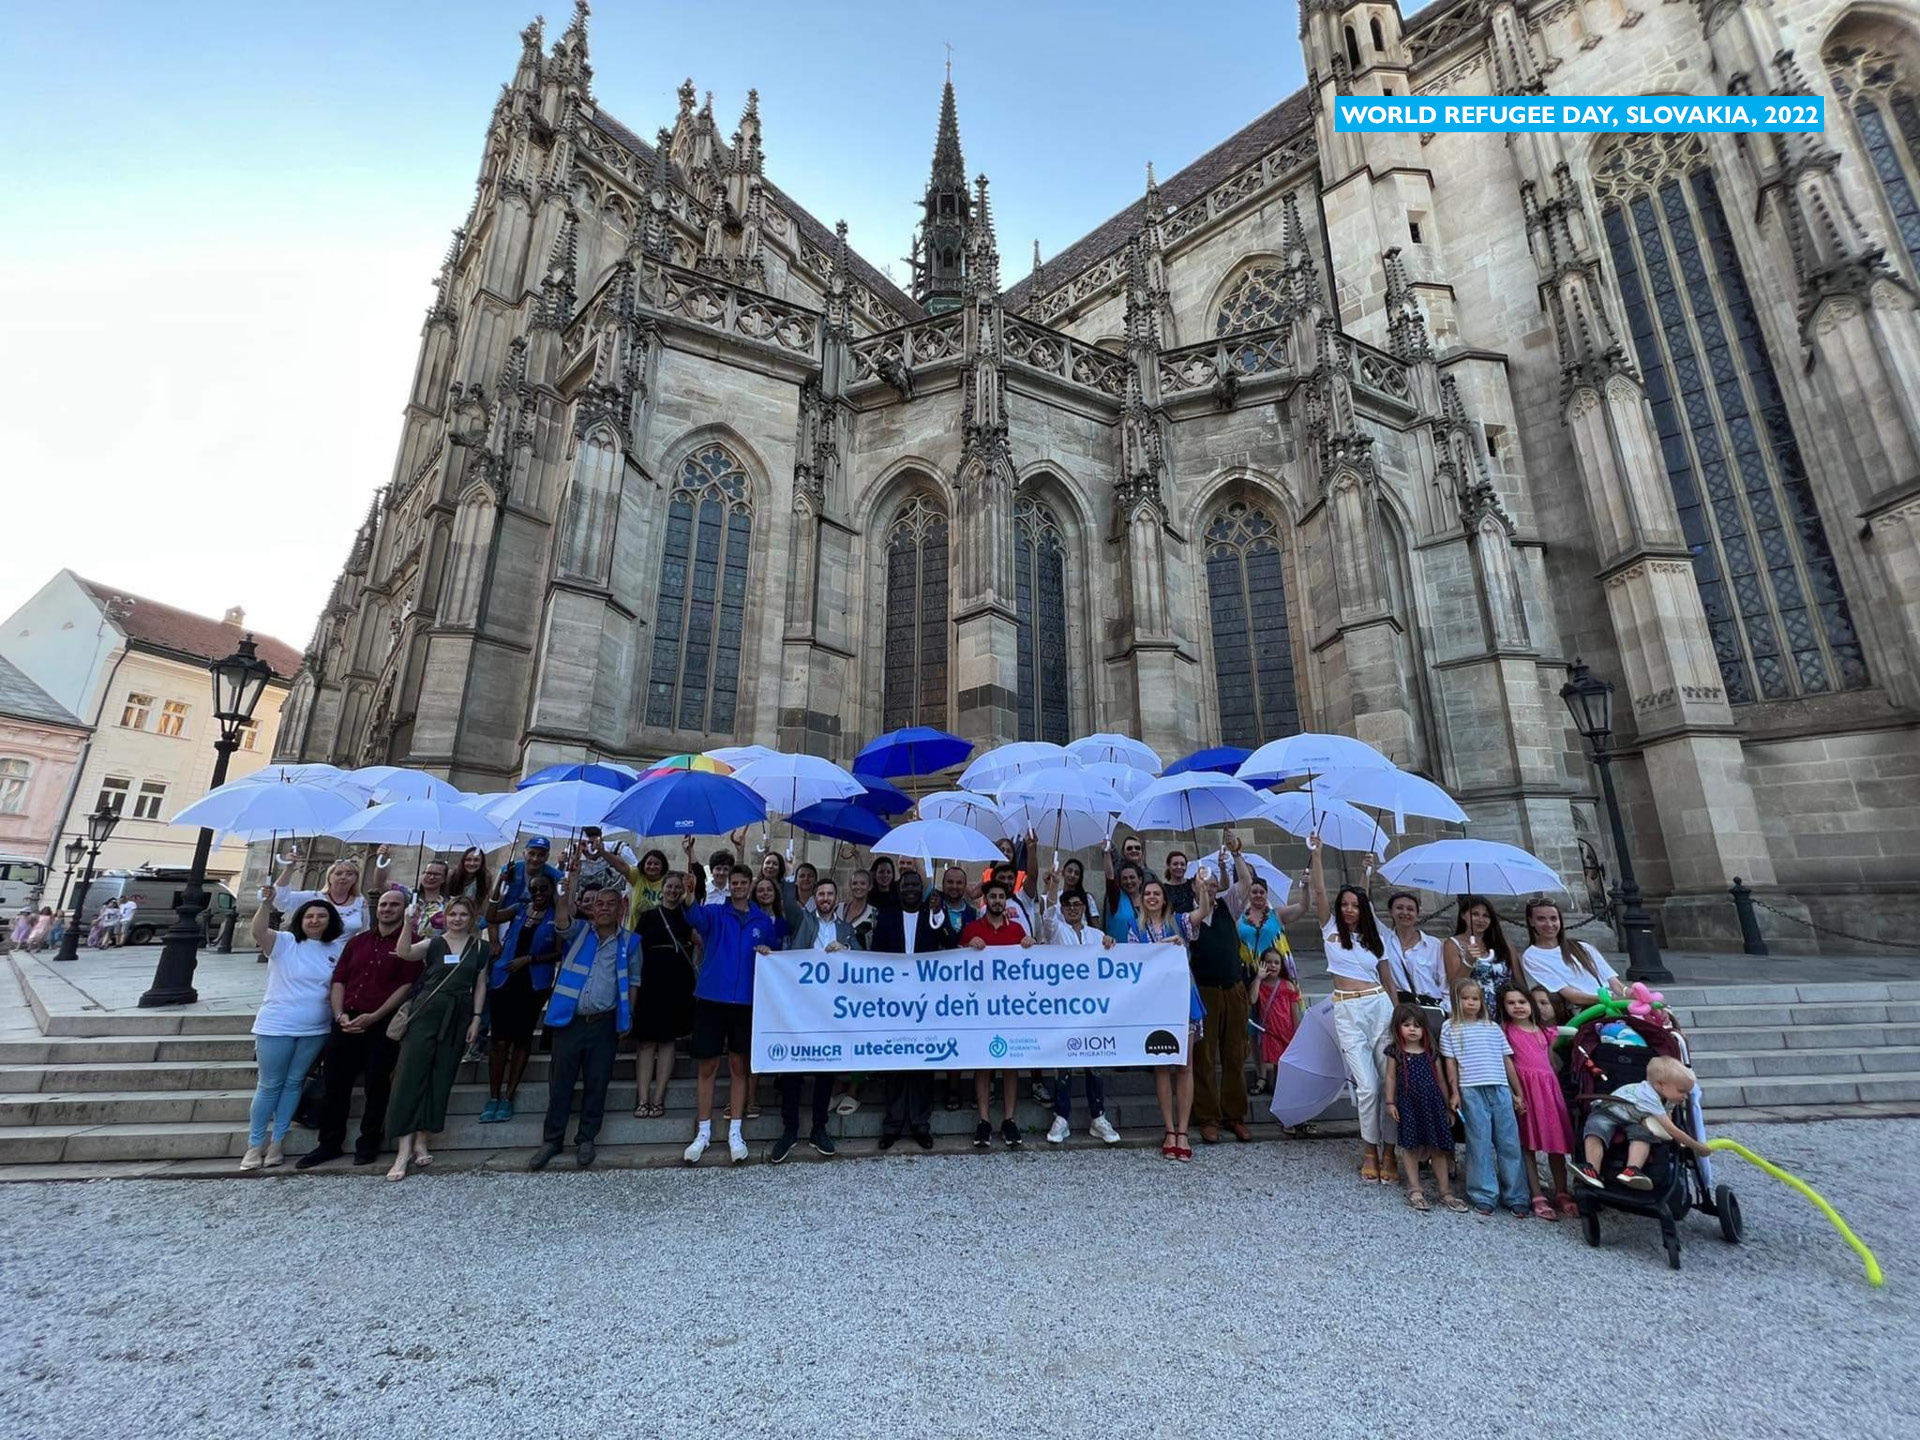 Umbrella parade at the event in Košice – World Refuee Day 2022. Photo © International Organization for Migration (IOM) 2022.